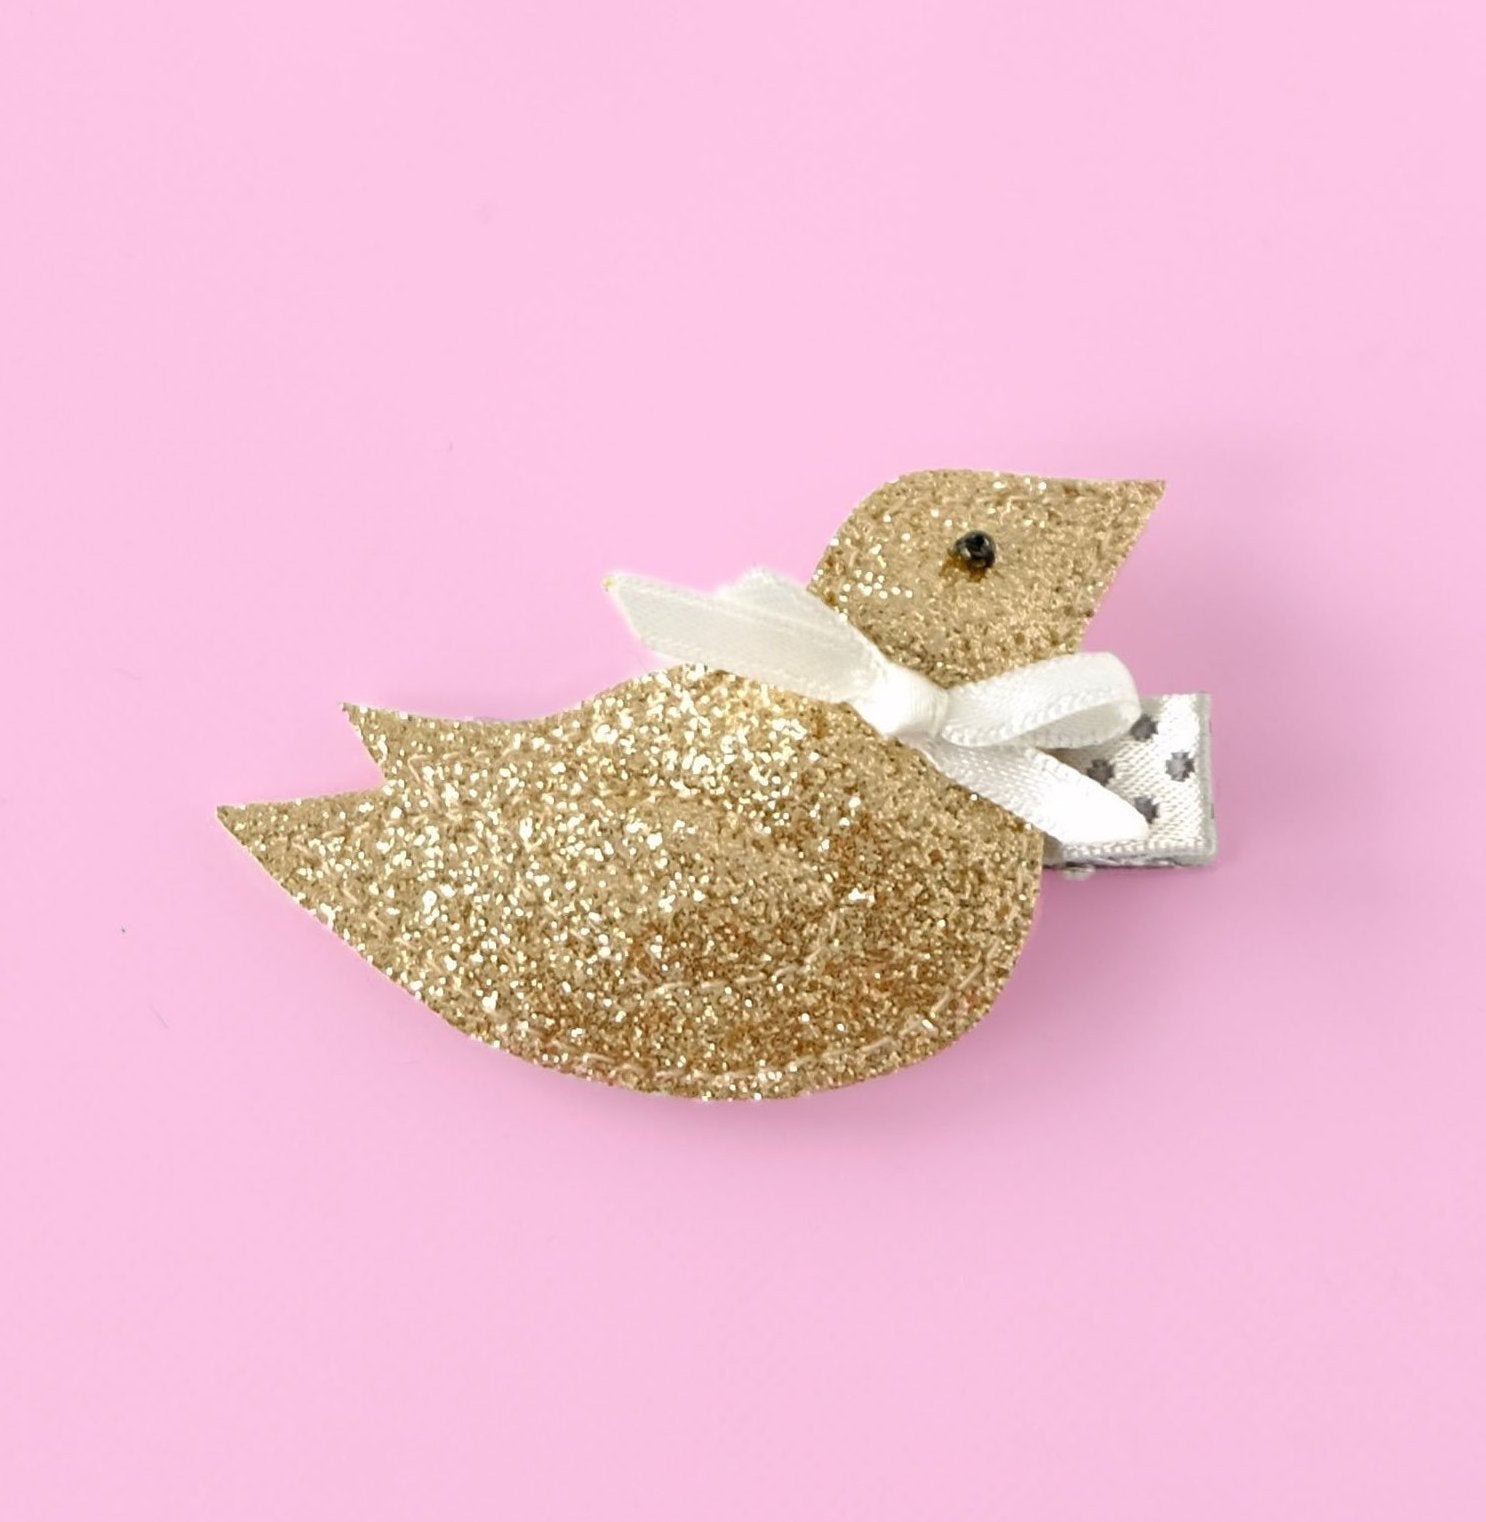 Unique and stylish, this whimsical bird with a bow hair clip is the perfect accessory for any Spring event.